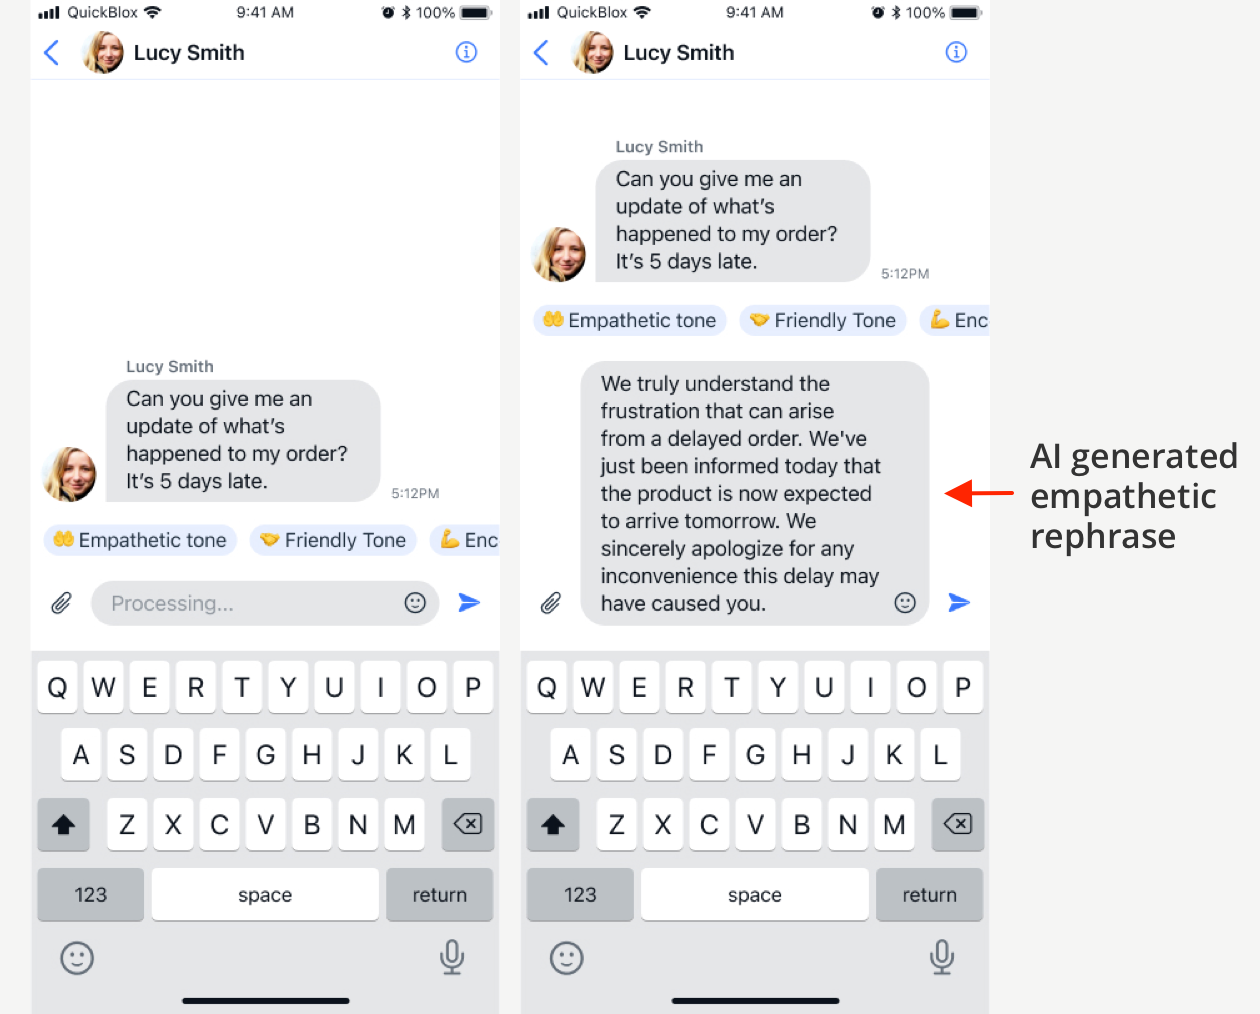 chat screen 2 and 3 showing AI Rephrase functionality